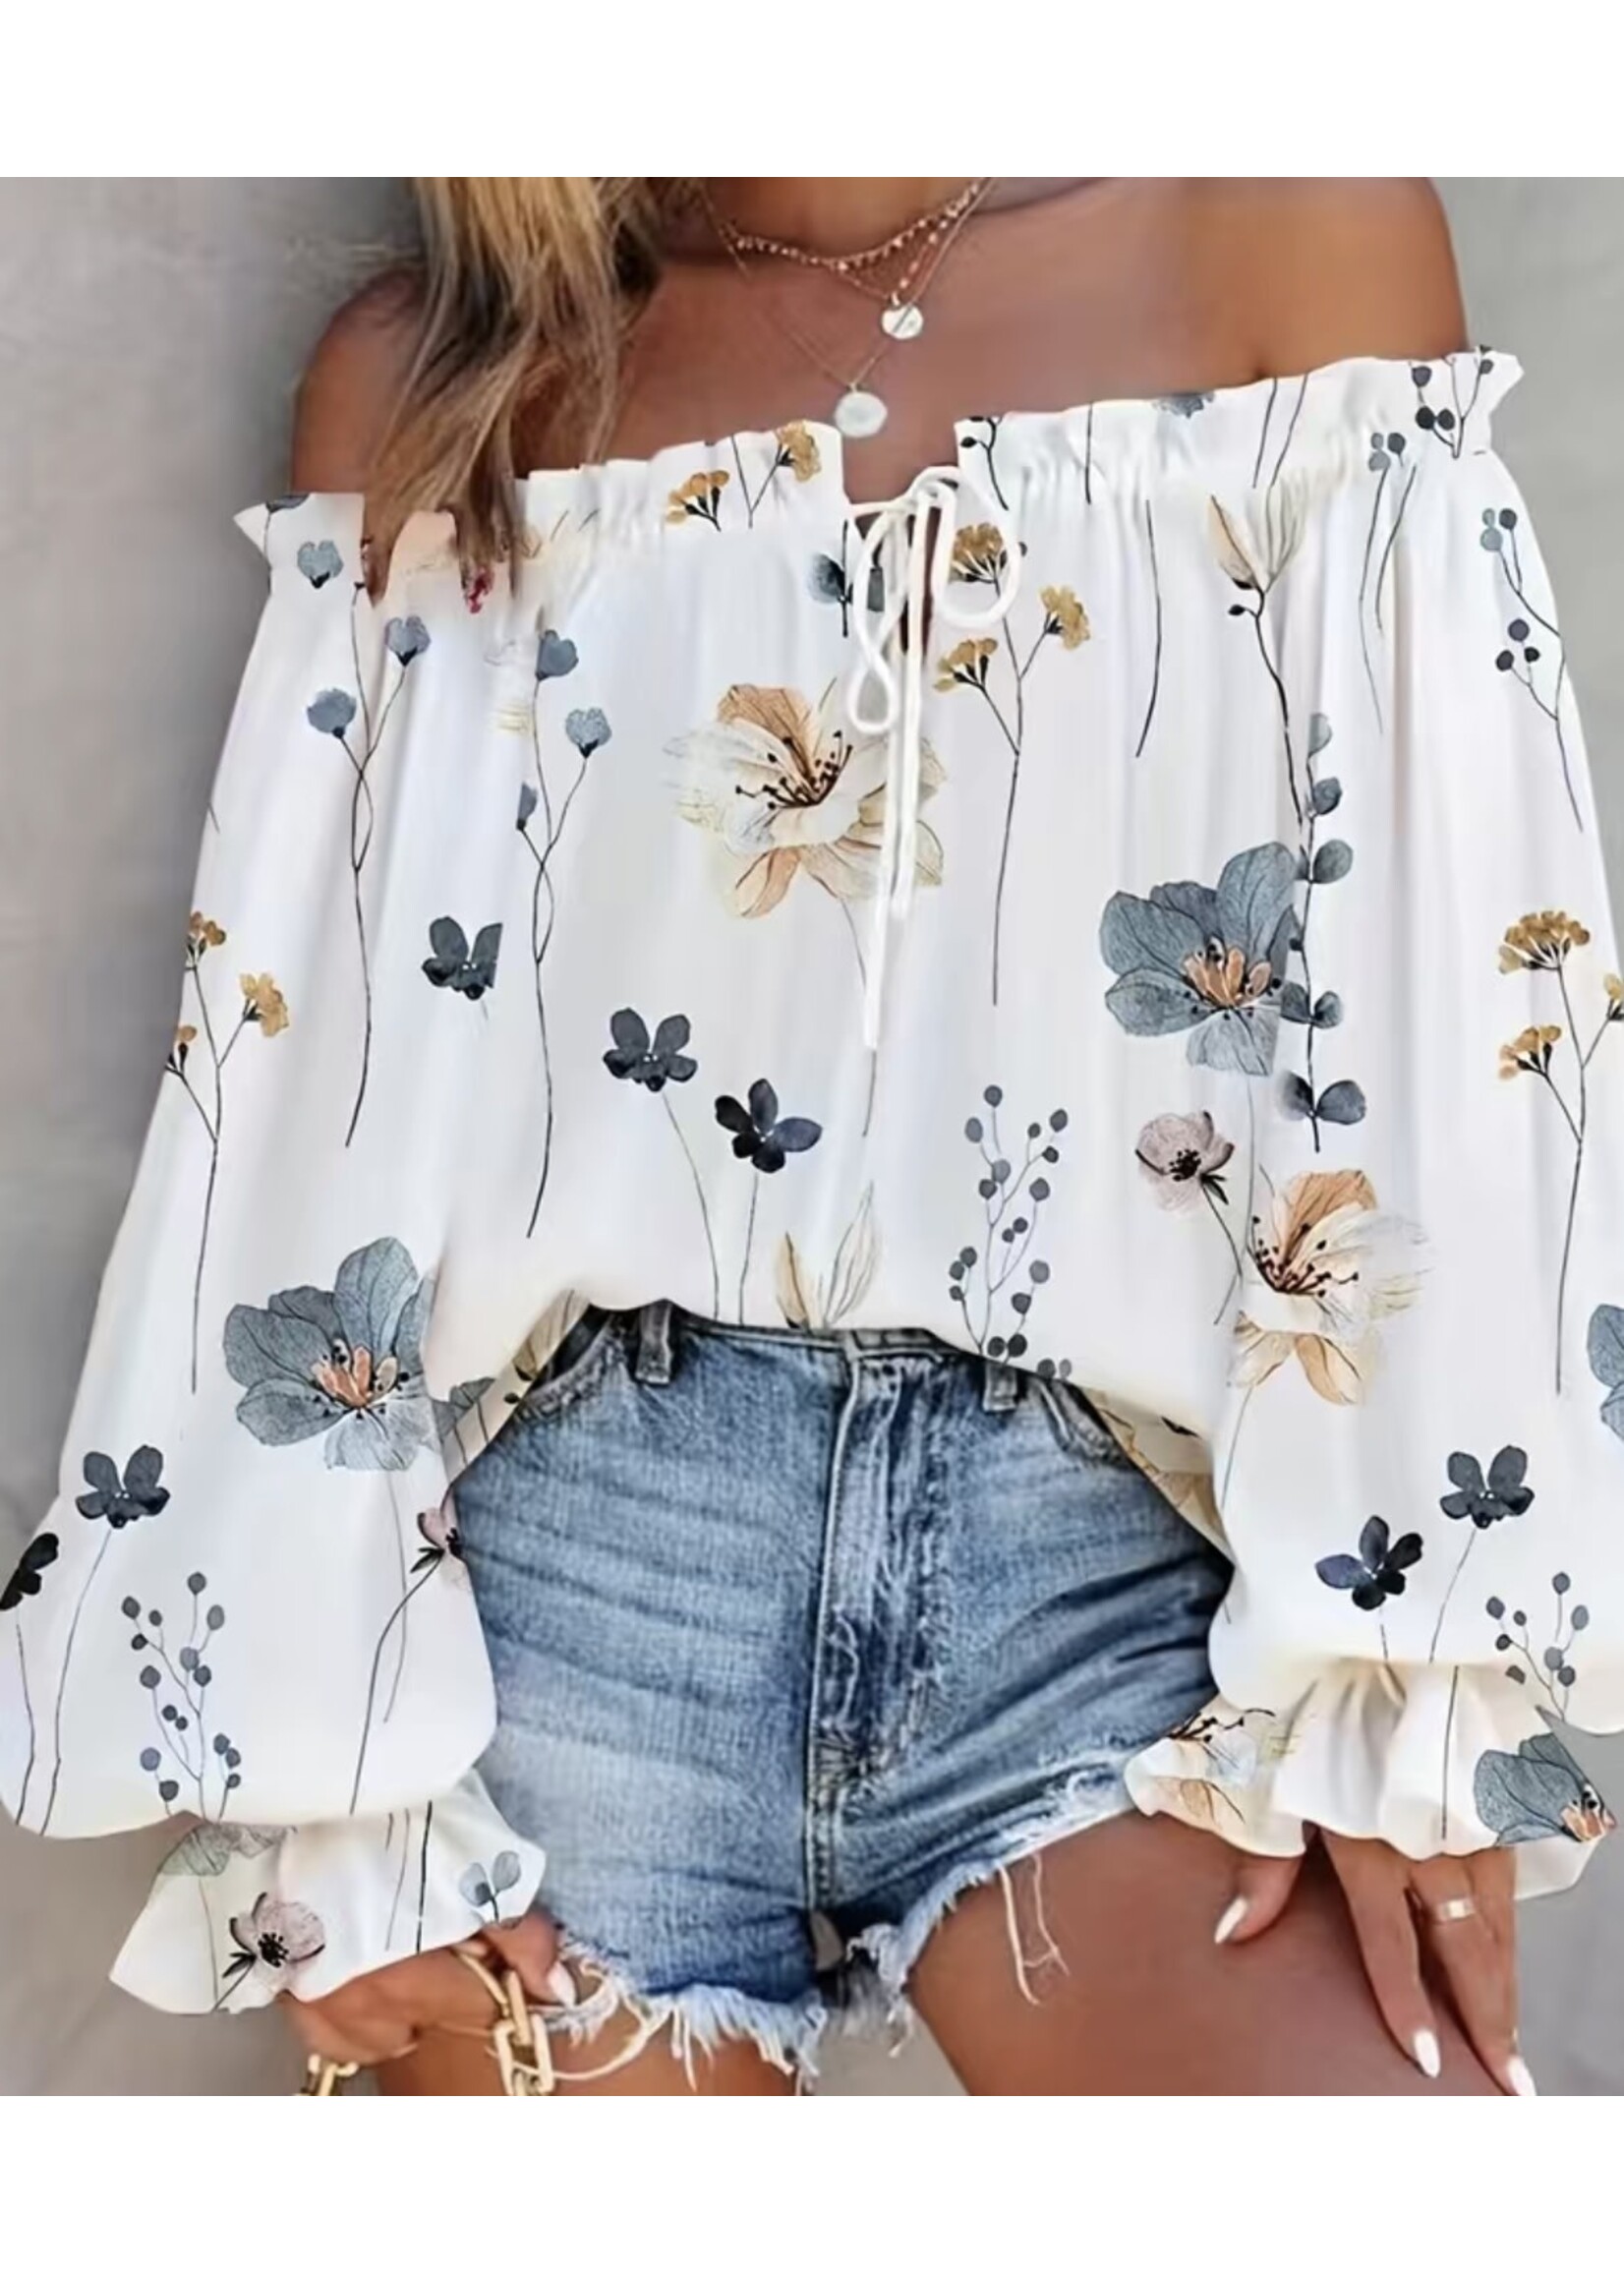 Daisy Mae White Blouse with Blue Flowers